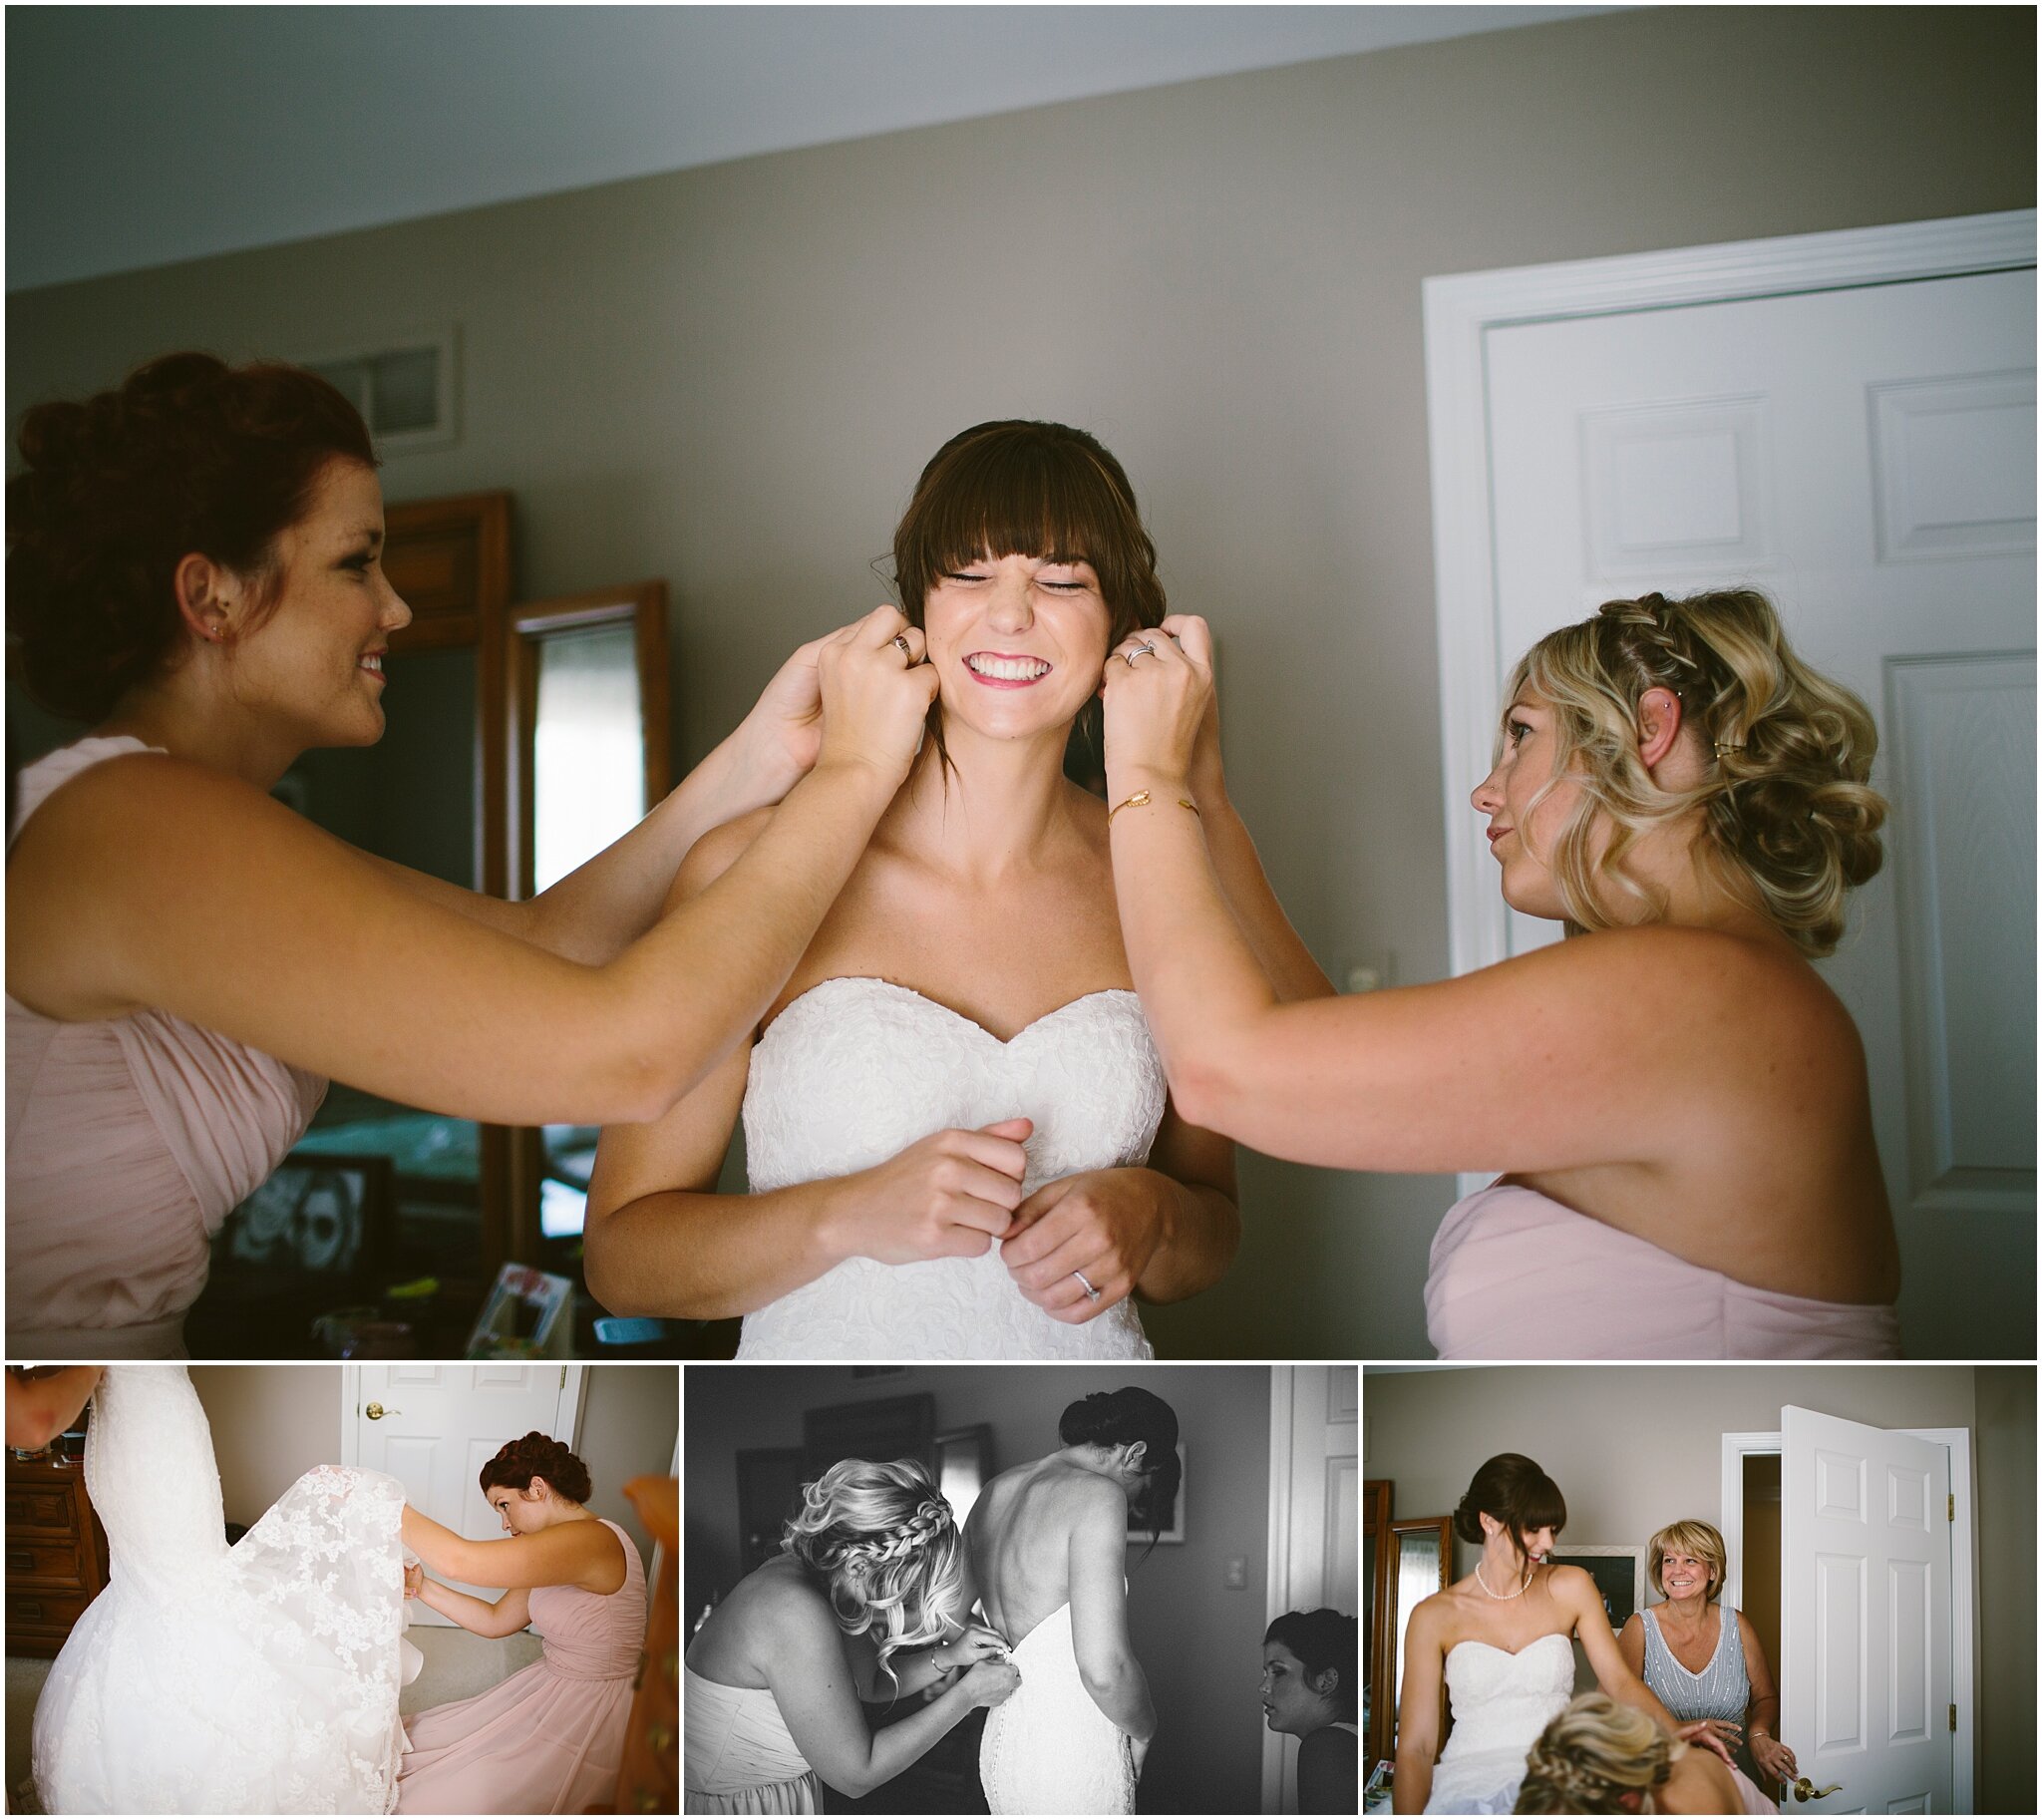 OUR_5TH_ANNIVERSARY_BROOKE_TOBIN_PHOTOGRAPHY_PHOTOS_BY_DANAANNPHOTOGRAPHY_006.jpg